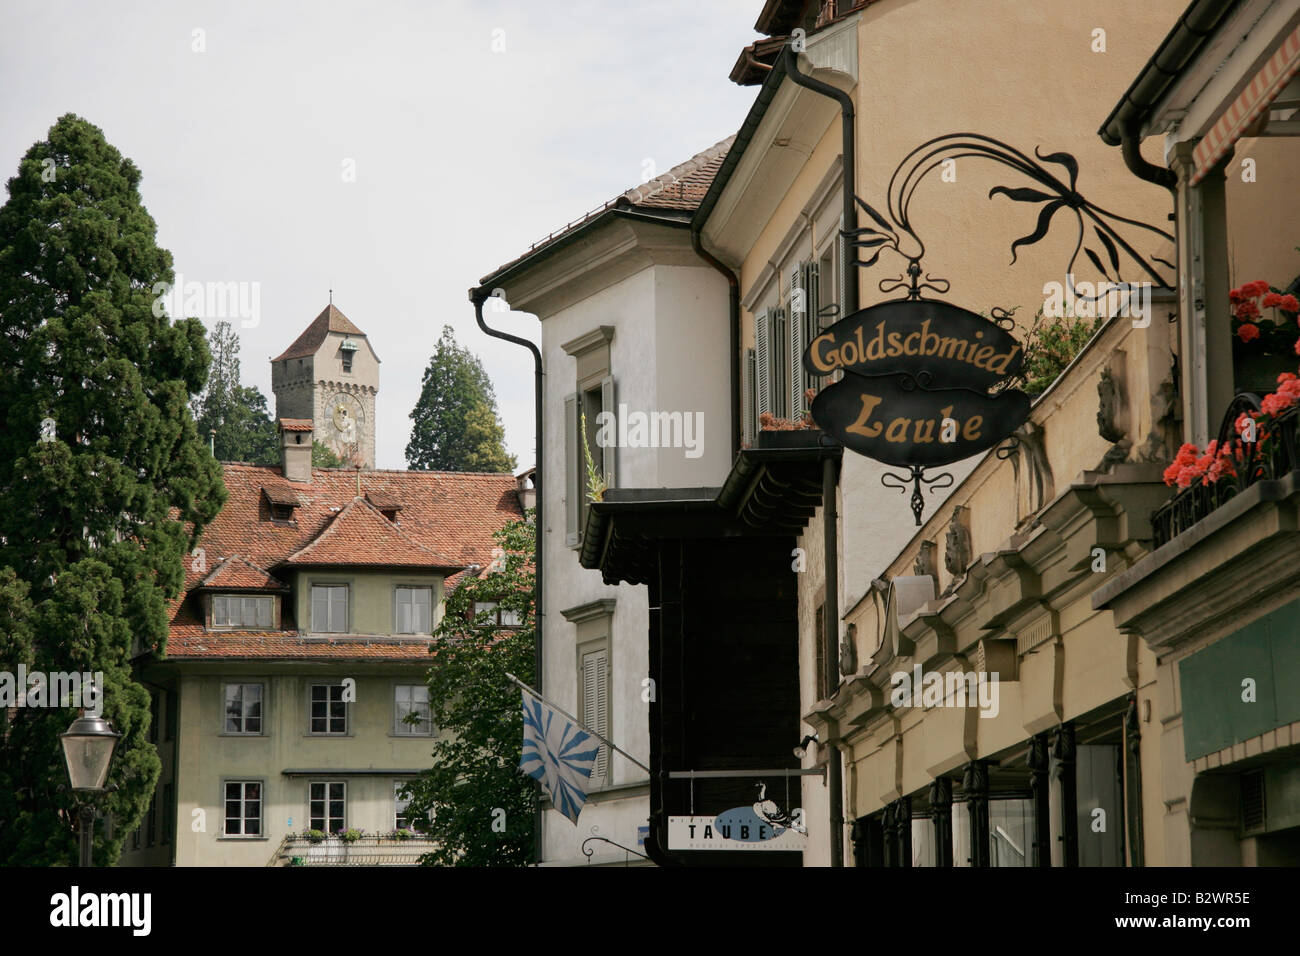 Zyt tower of the Rampart Wall seen on the horizon of a traditional Swiss street in old Lucerne, Central Switzerland Stock Photo